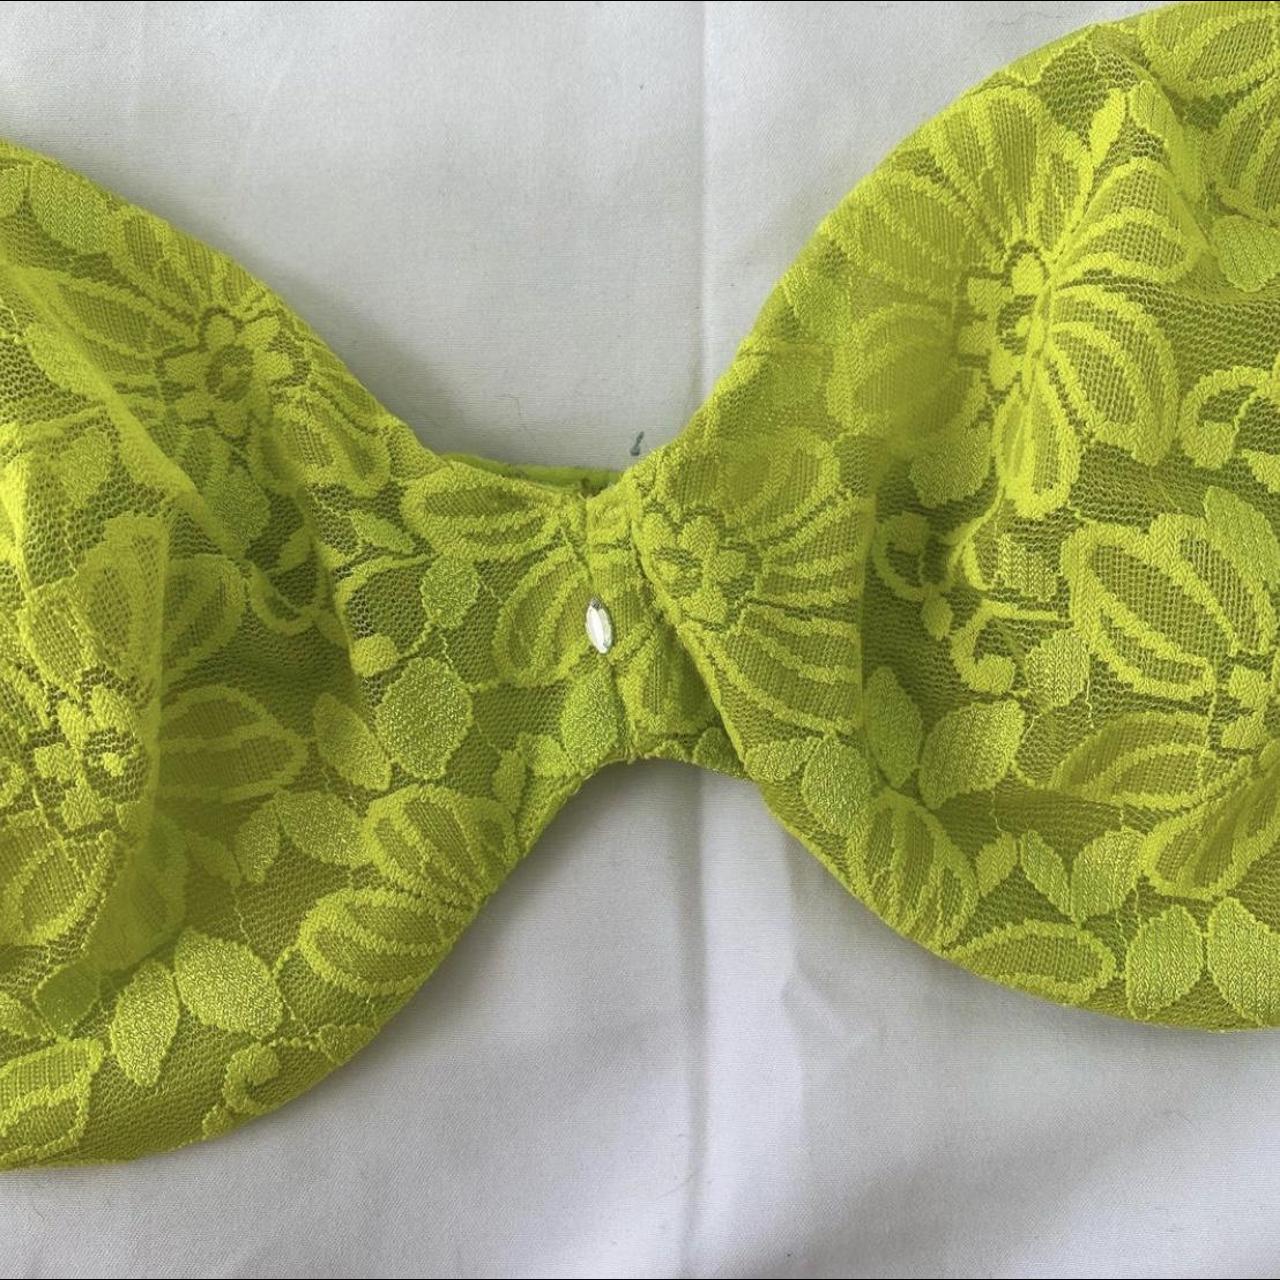 lime green lace bralette💚 tiny jewel in the center. - Depop